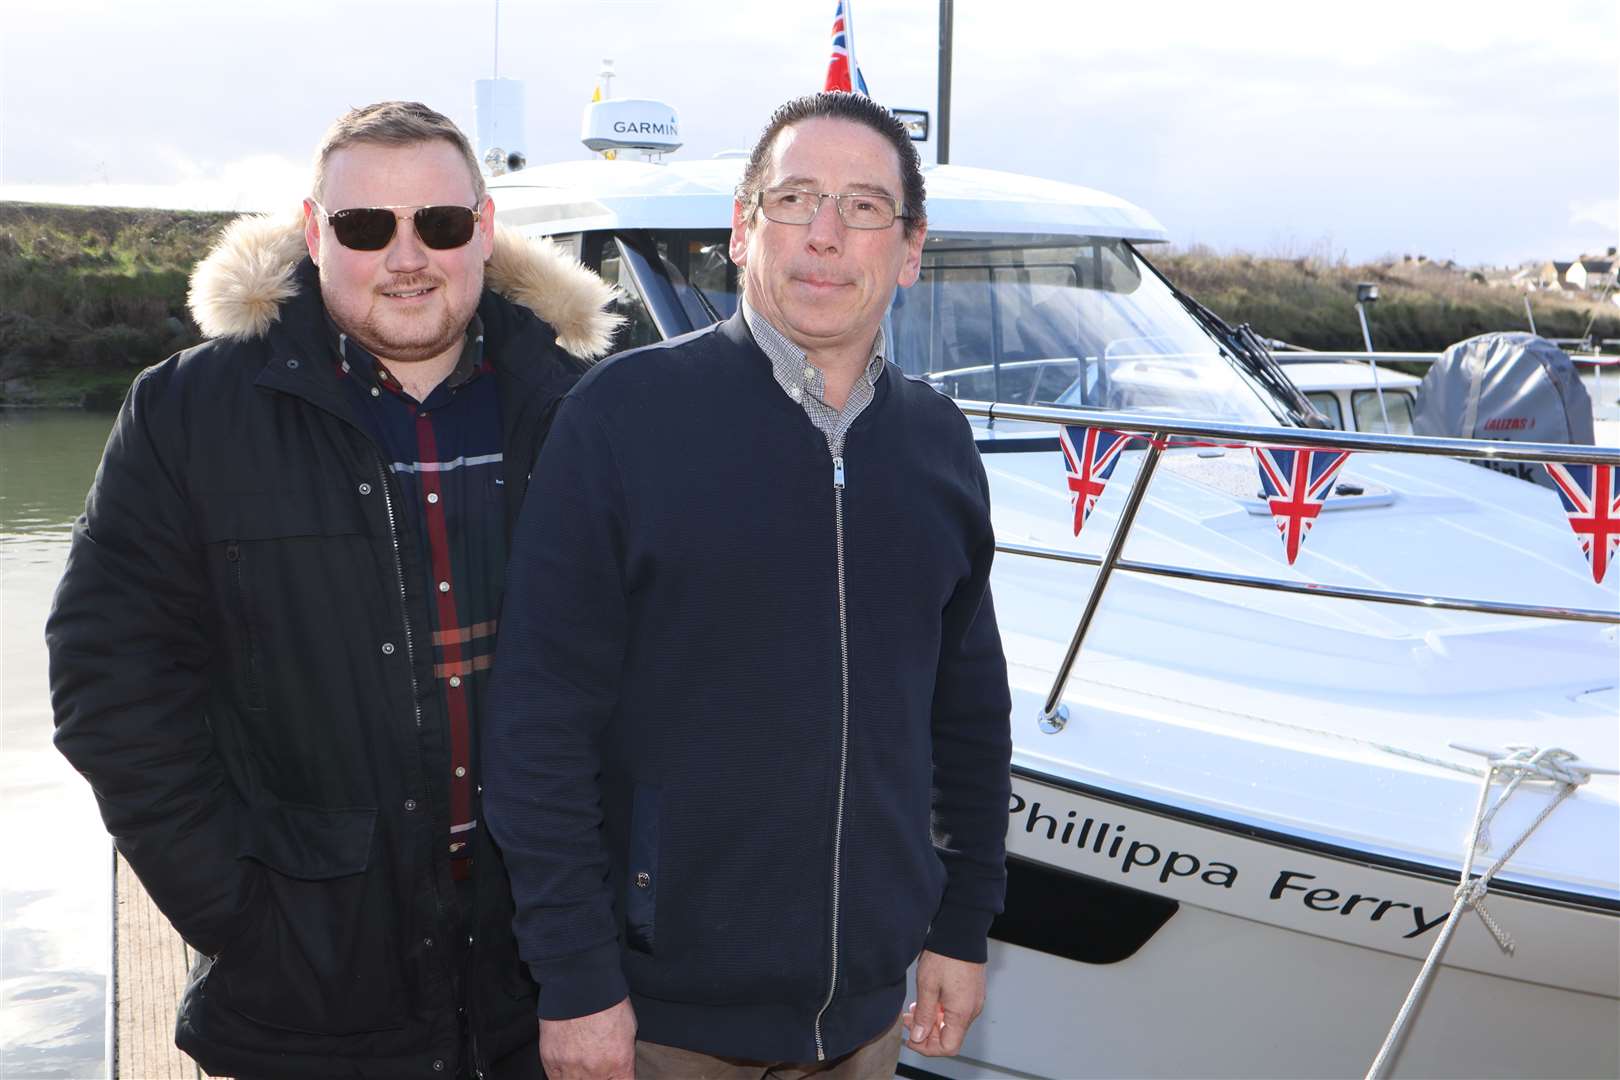 Adam Ervin, owner of the Queen Phillippa guest house at Queenborough with his son Jake and the £185k Merry Phillippa ferry which will be linking Sheppey to Southend